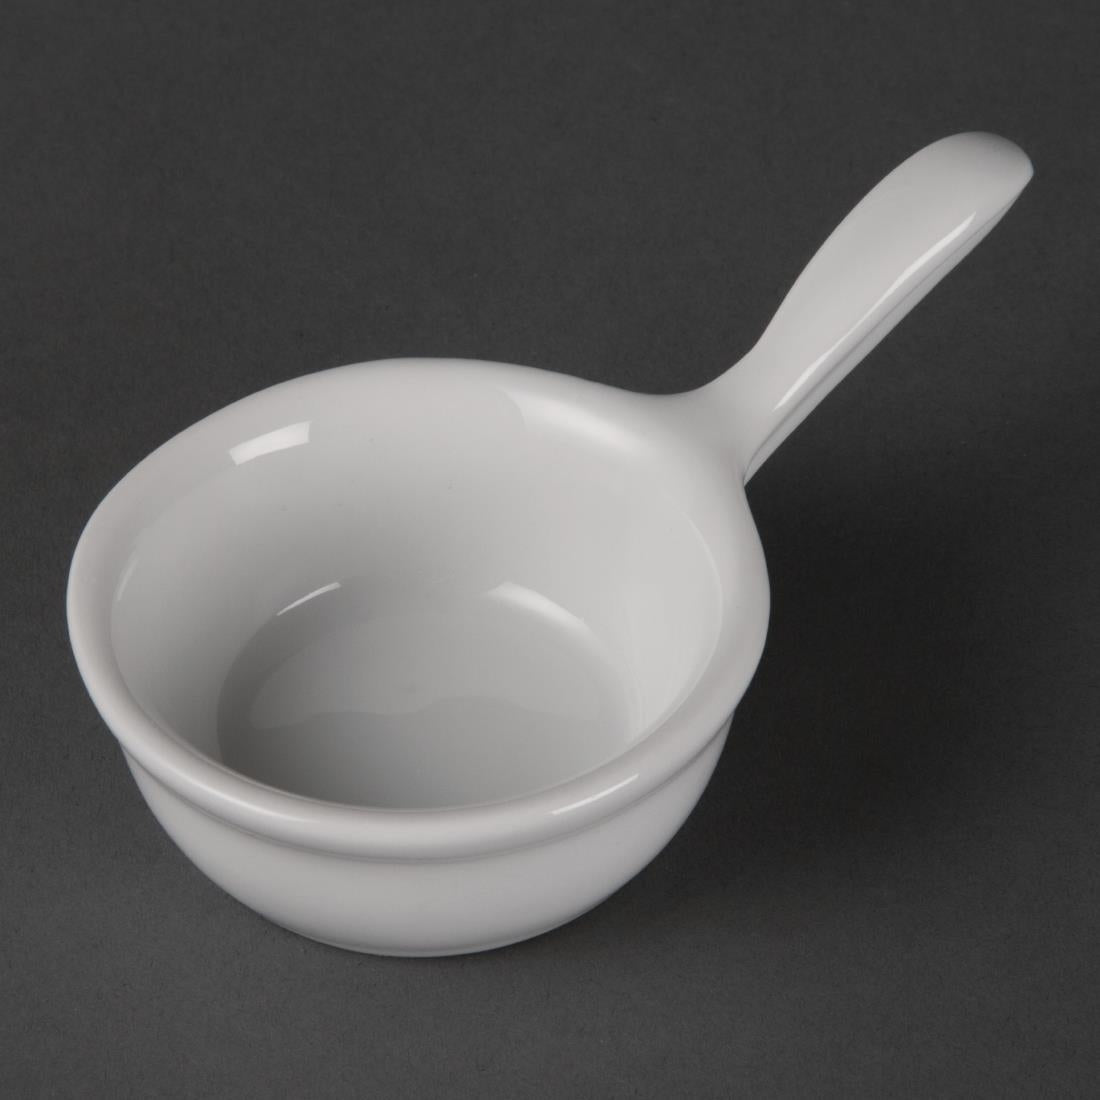 CE544 Olympia Miniature Pan Shaped Bowls 35ml 1.2oz (Pack of 12)